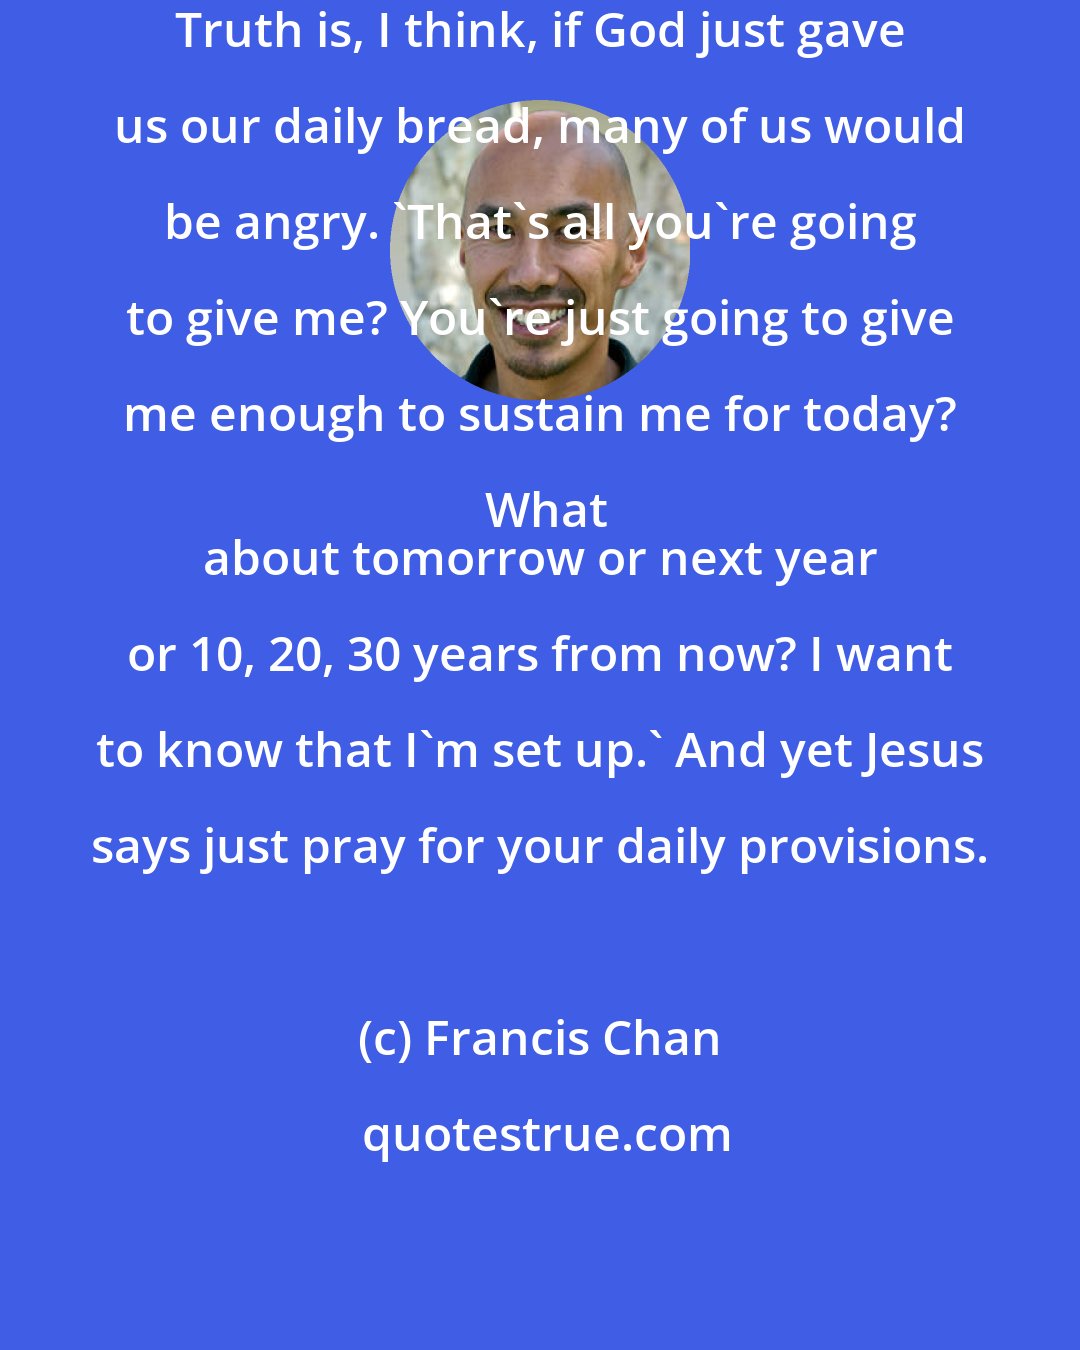 Francis Chan: Truth is, I think, if God just gave us our daily bread, many of us would be angry. 'That's all you're going to give me? You're just going to give me enough to sustain me for today? What
 about tomorrow or next year or 10, 20, 30 years from now? I want to know that I'm set up.' And yet Jesus says just pray for your daily provisions.